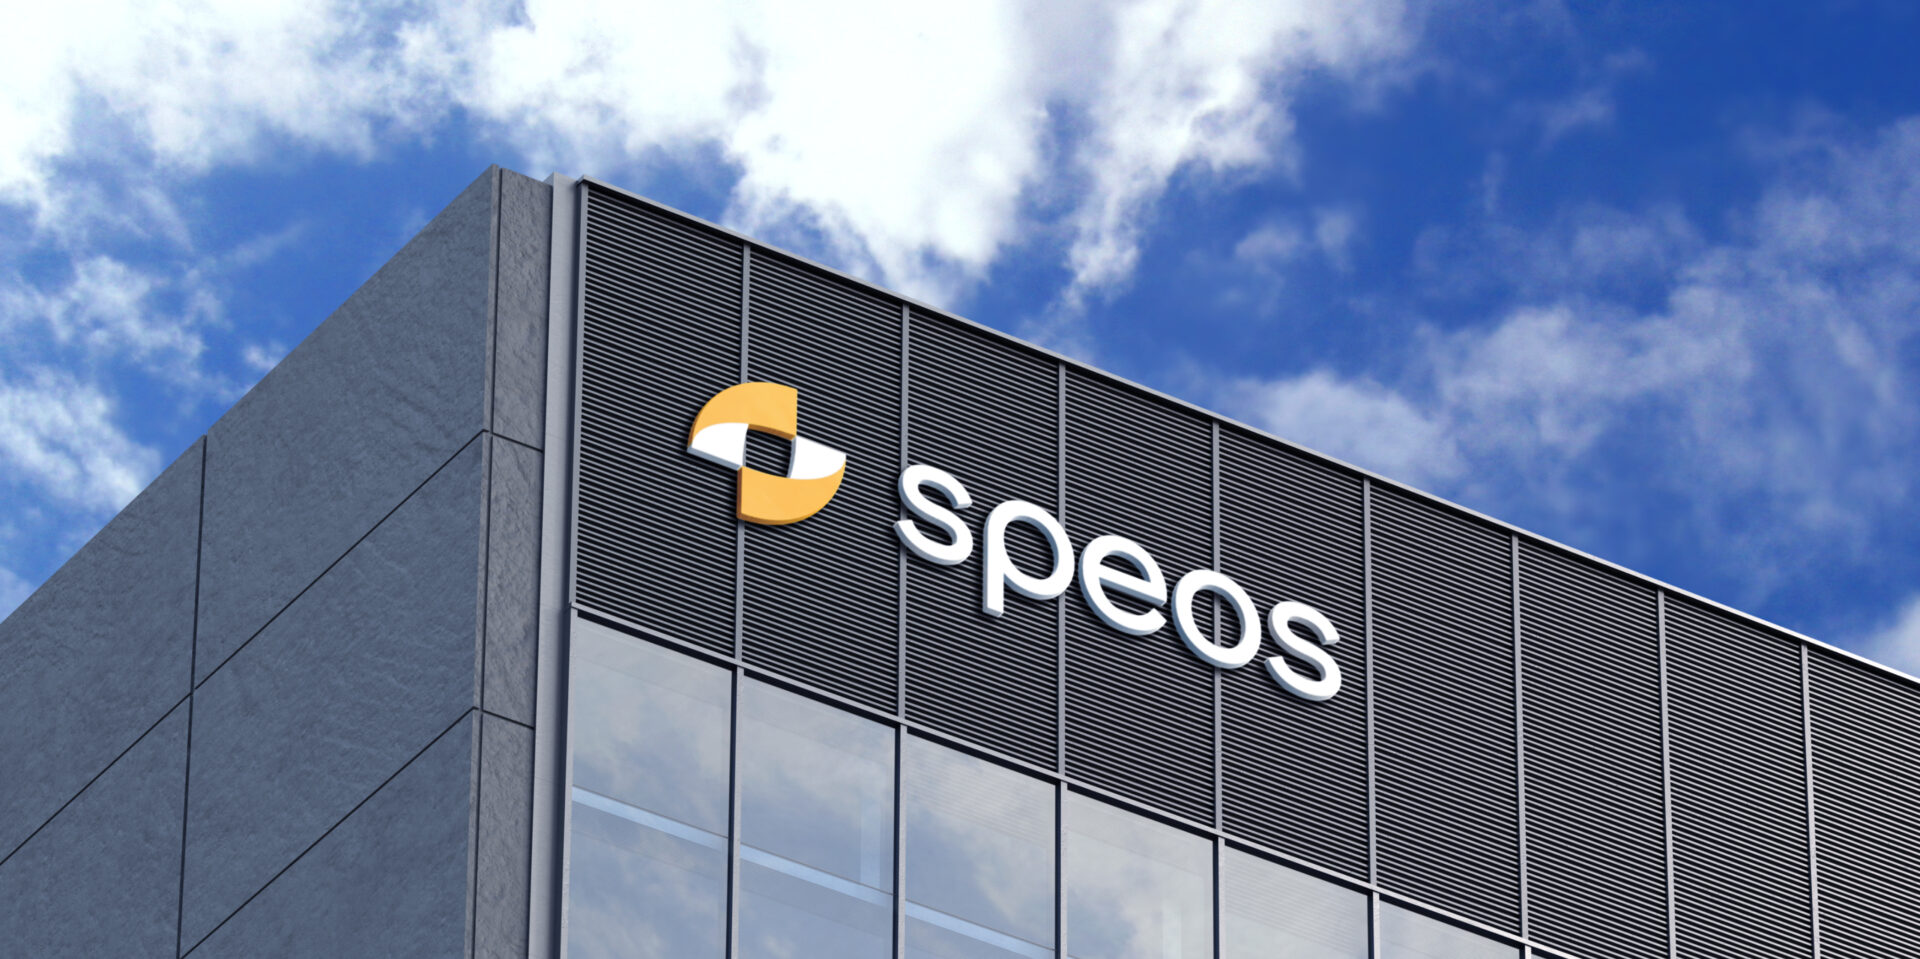 The Speos sign on the company building, logo created by Atelier Design, a Brussels-based communications agency.